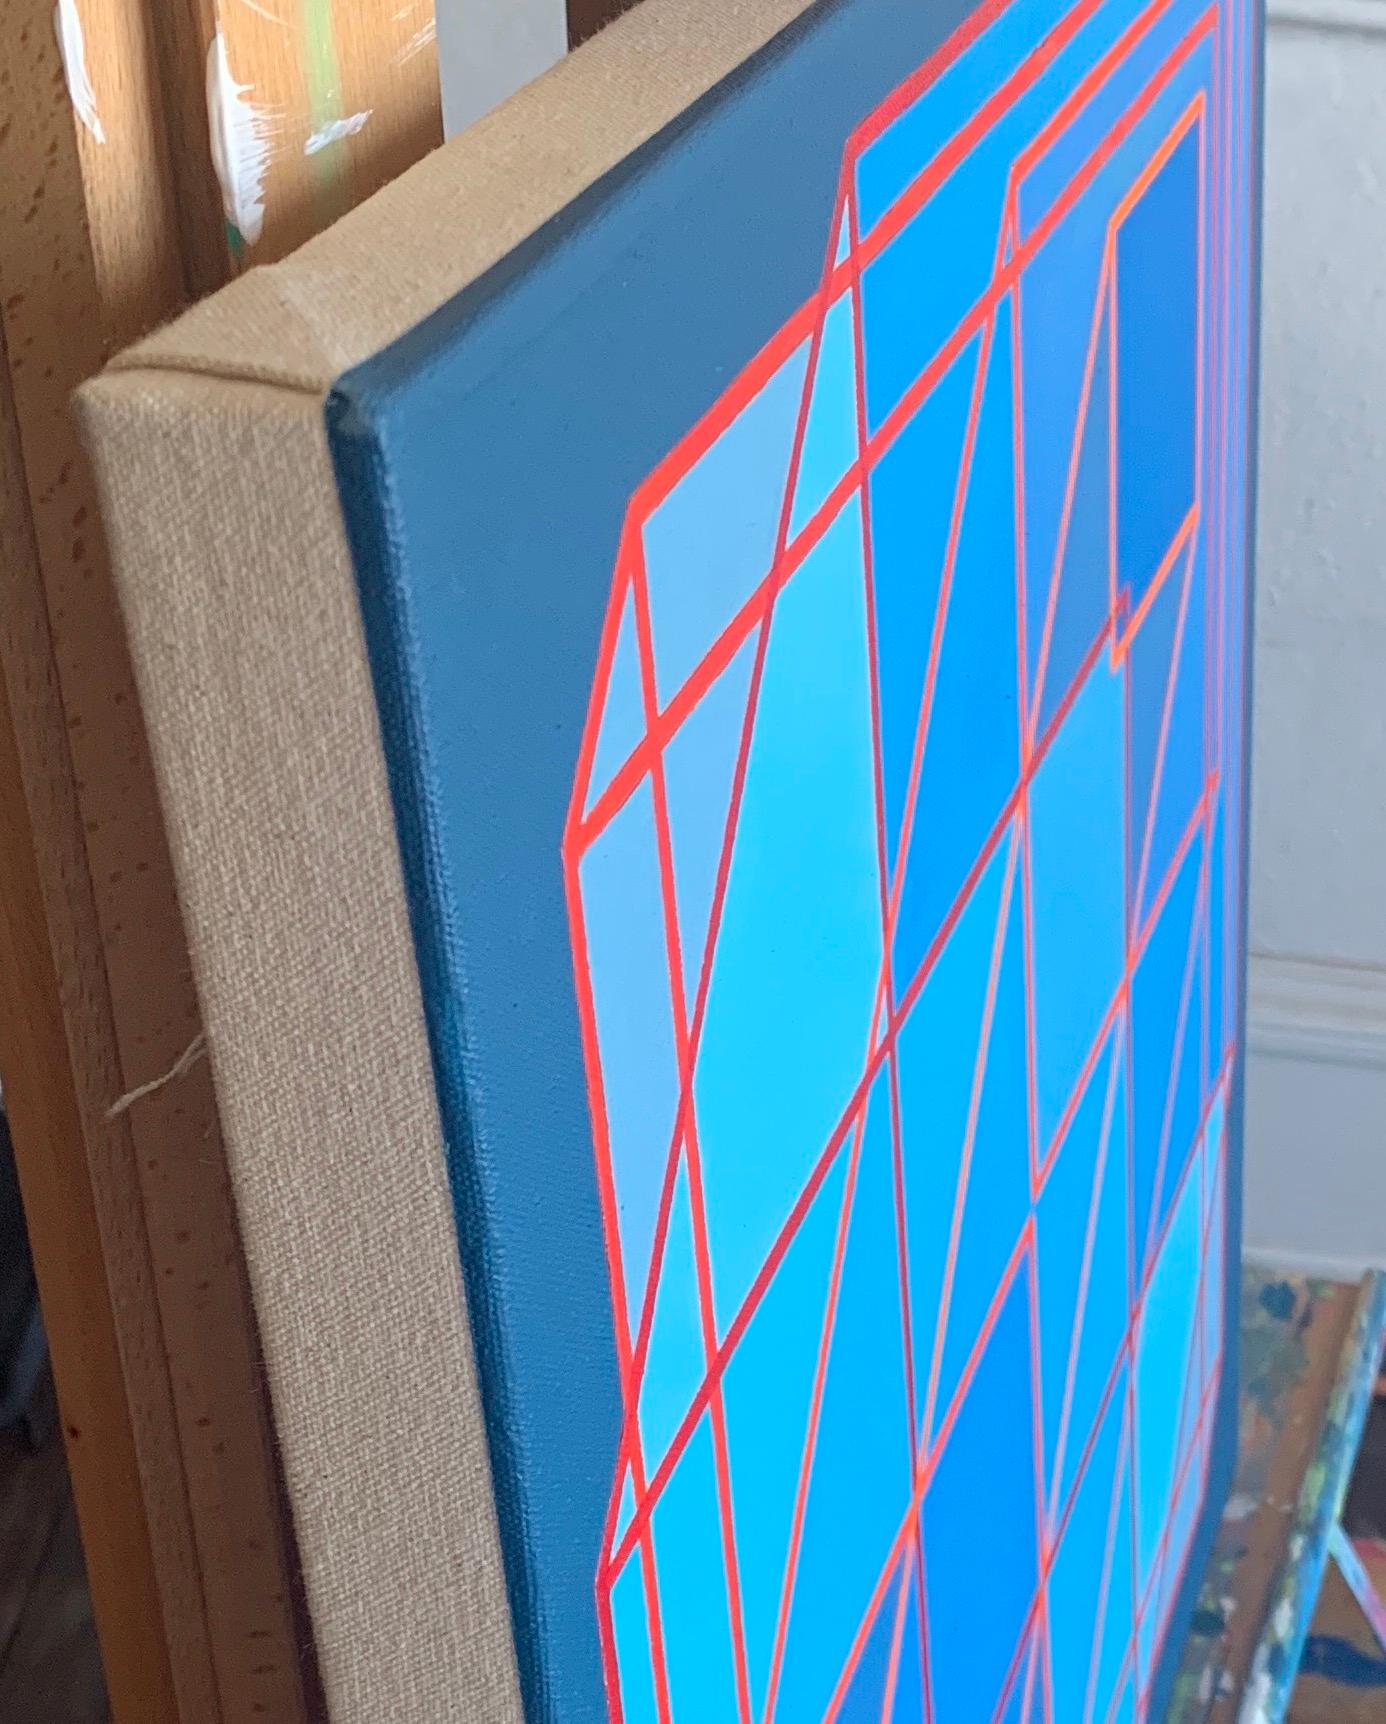 Expanded Cubes #4: geometric abstract Op Art painting in blue, gray w/ red lines - Abstract Painting by Benjamin Weaver